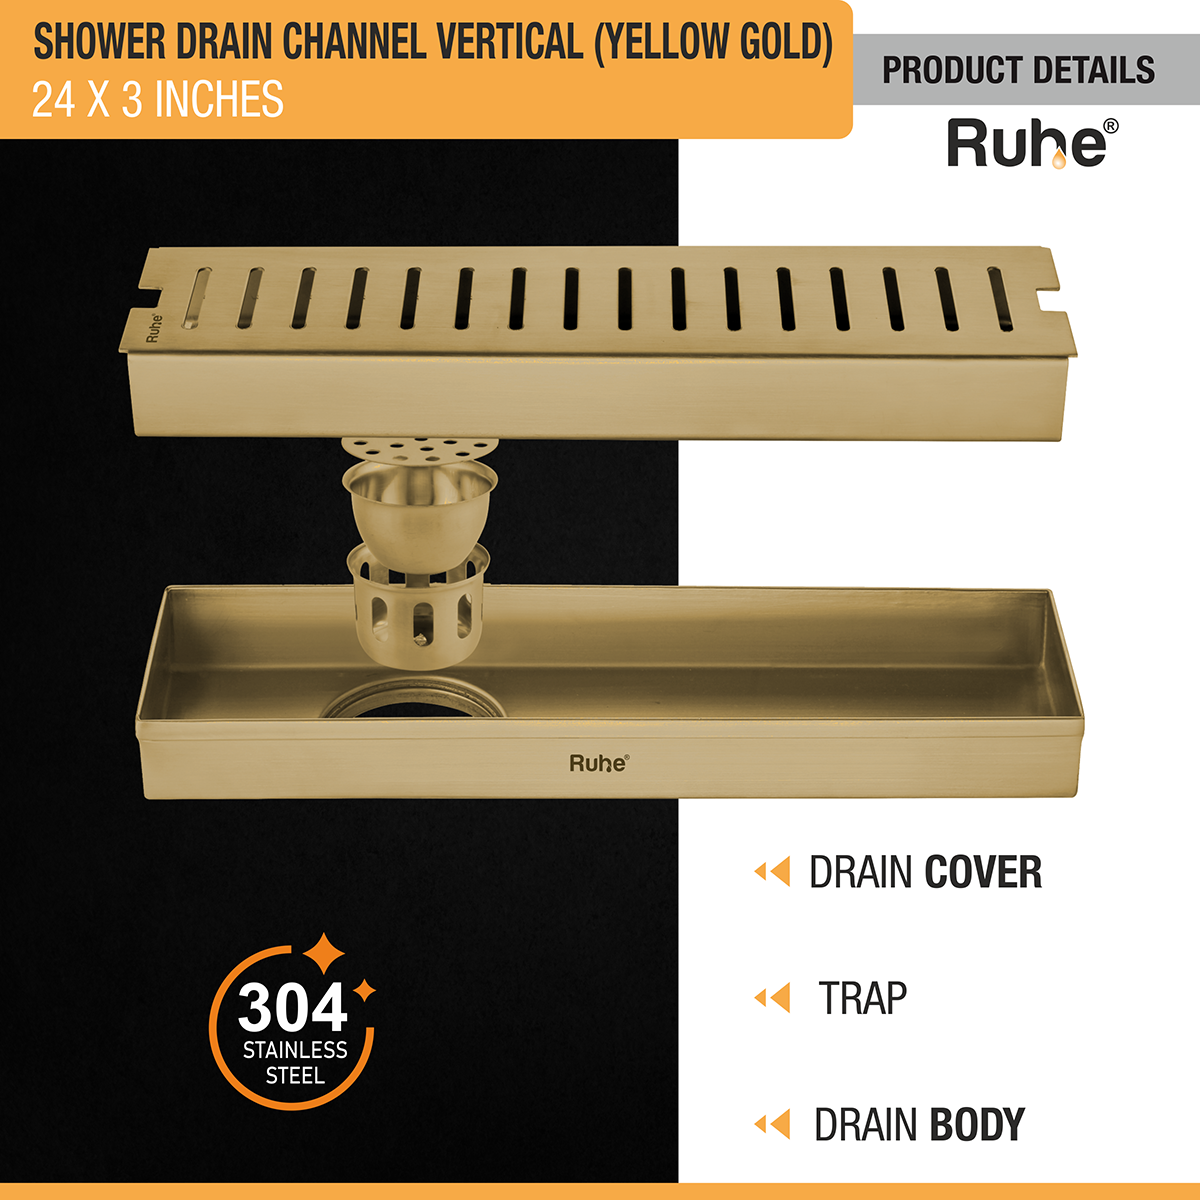 Vertical Shower Drain Channel (24 x 3 Inches) YELLOW GOLD product details